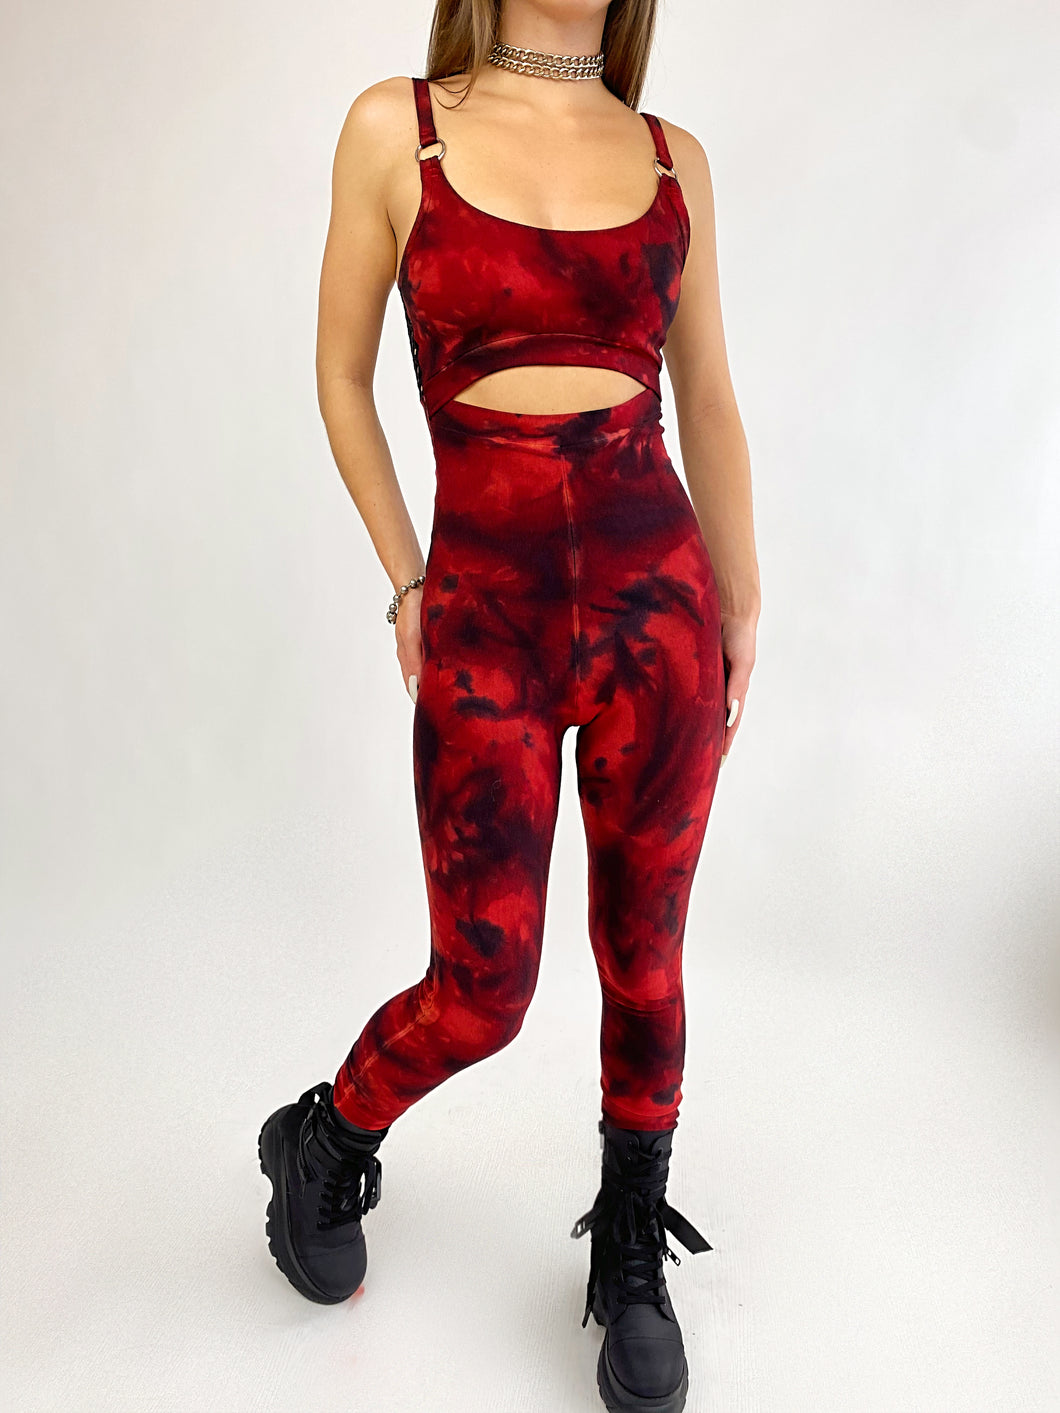 Afterhours Jumpsuit in Cherry Bomb